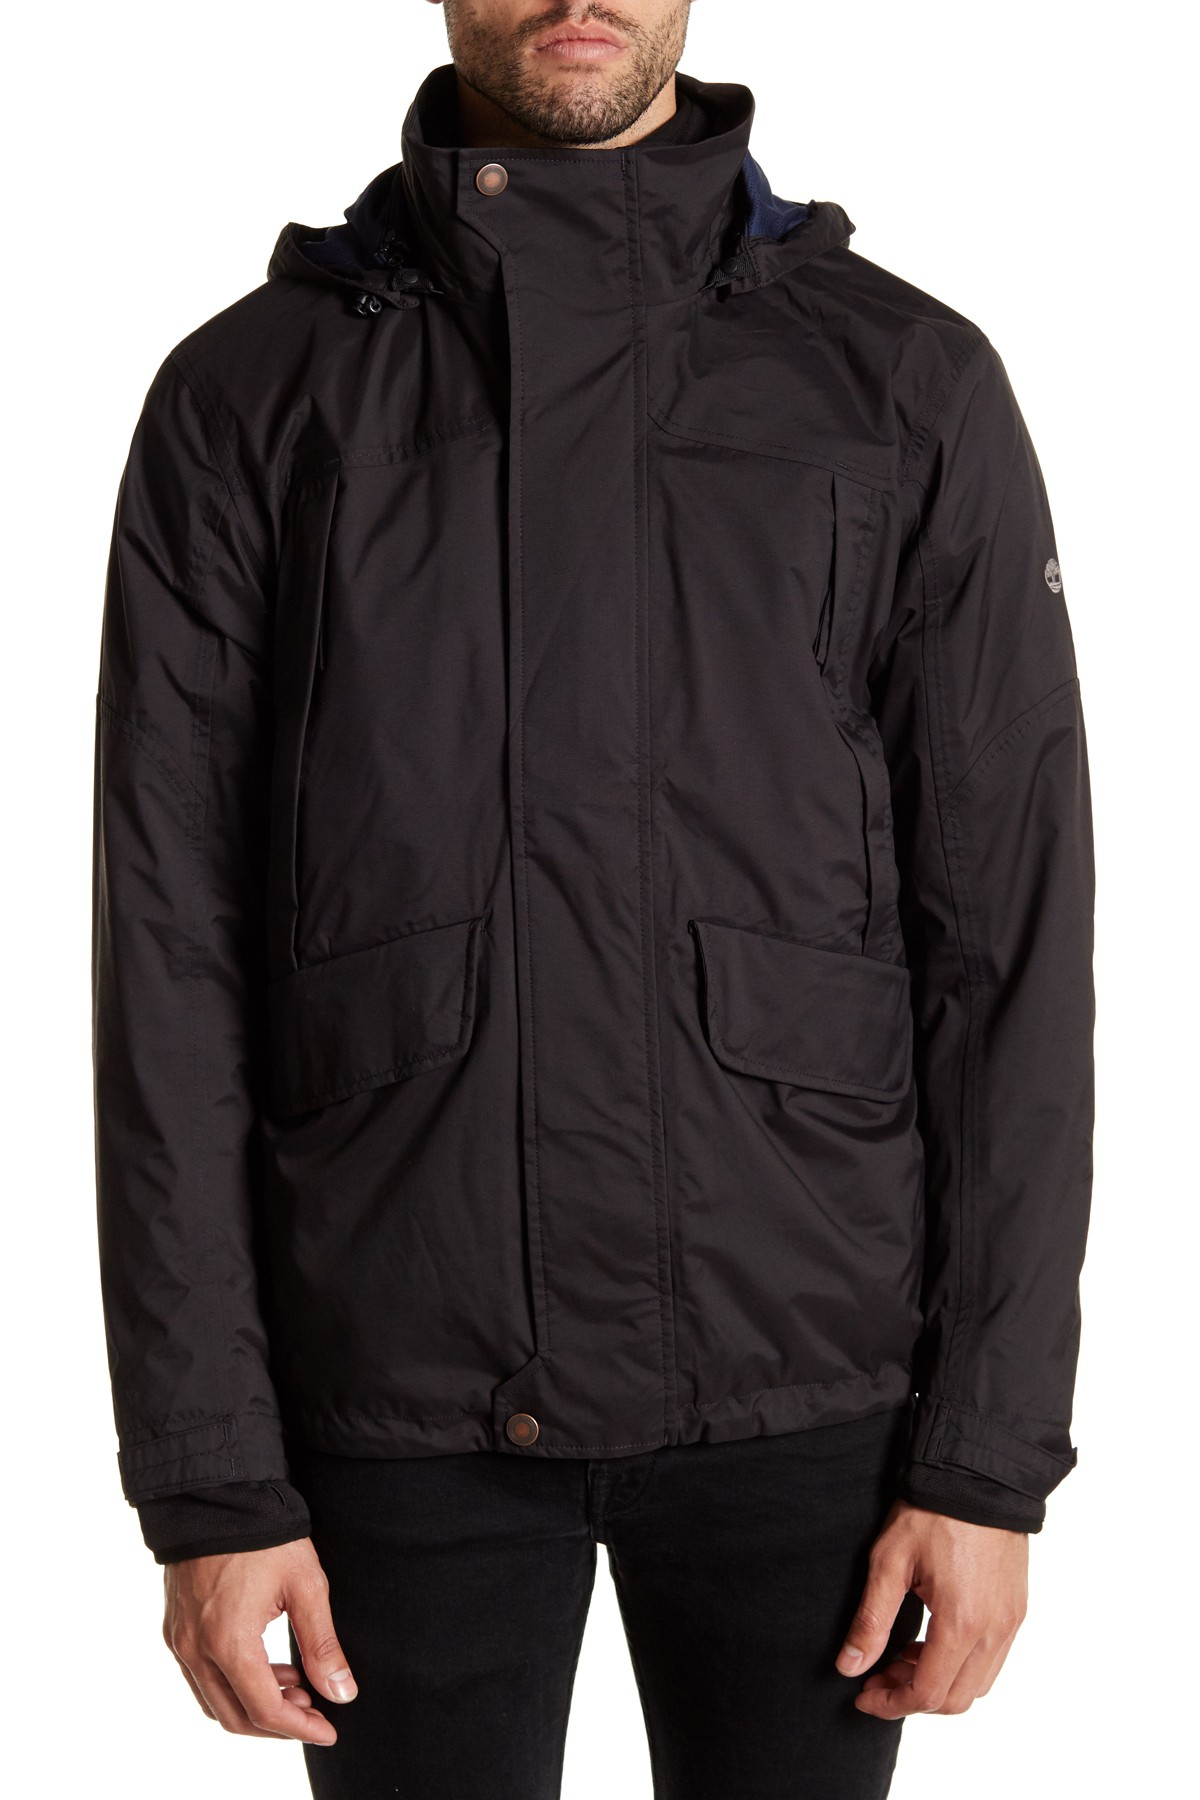 Timberland Synthetic Hyvent Ragged Mountain 3-in-1 Jacket in Black for ...